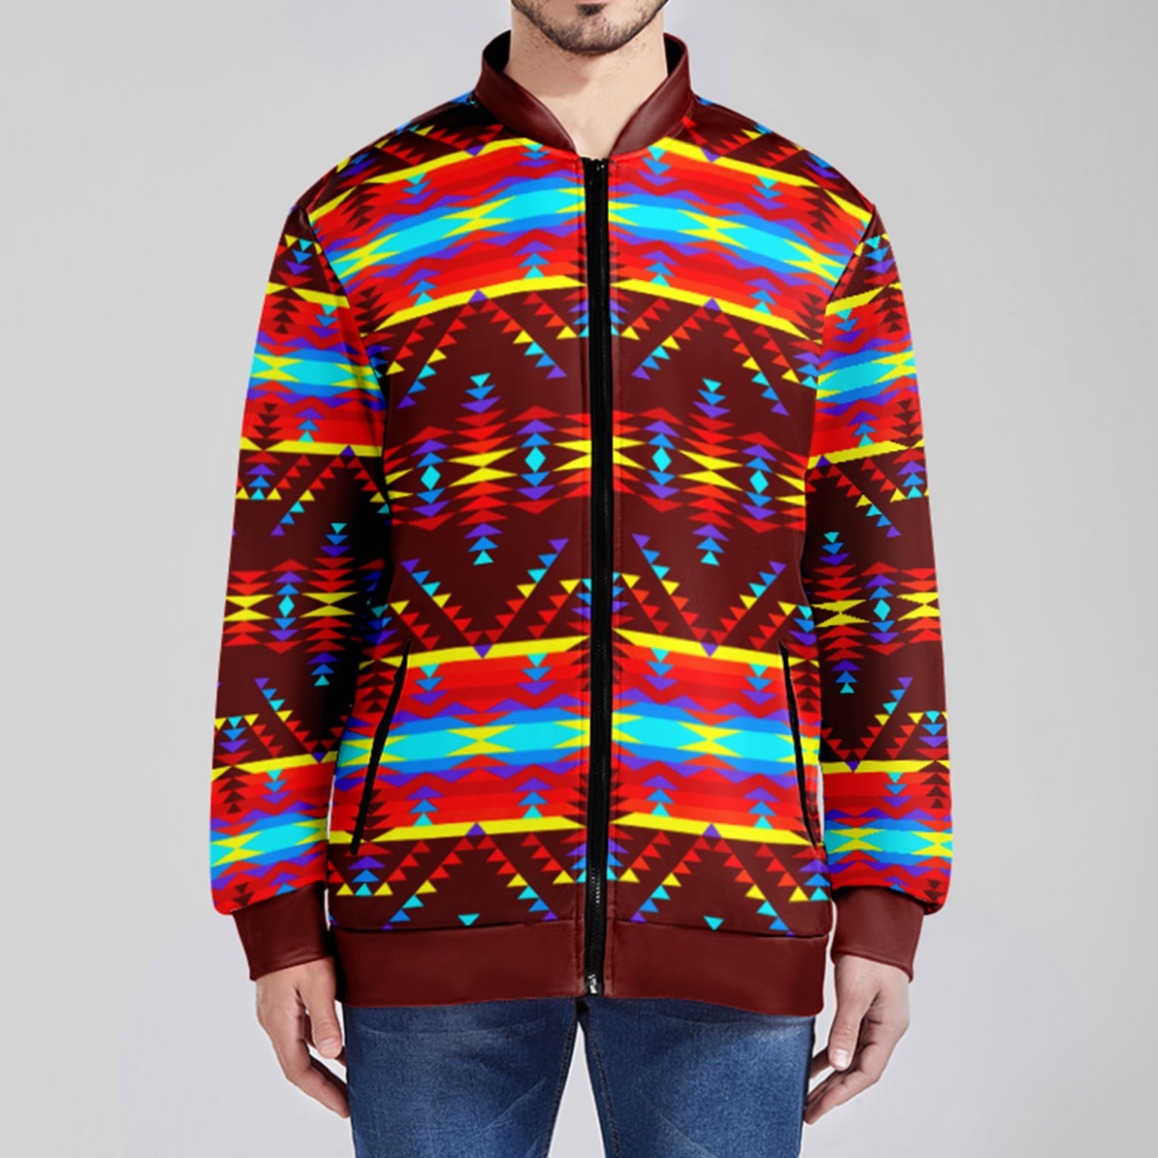 Visions of Lasting Peace Zippered Collared Lightweight Jacket